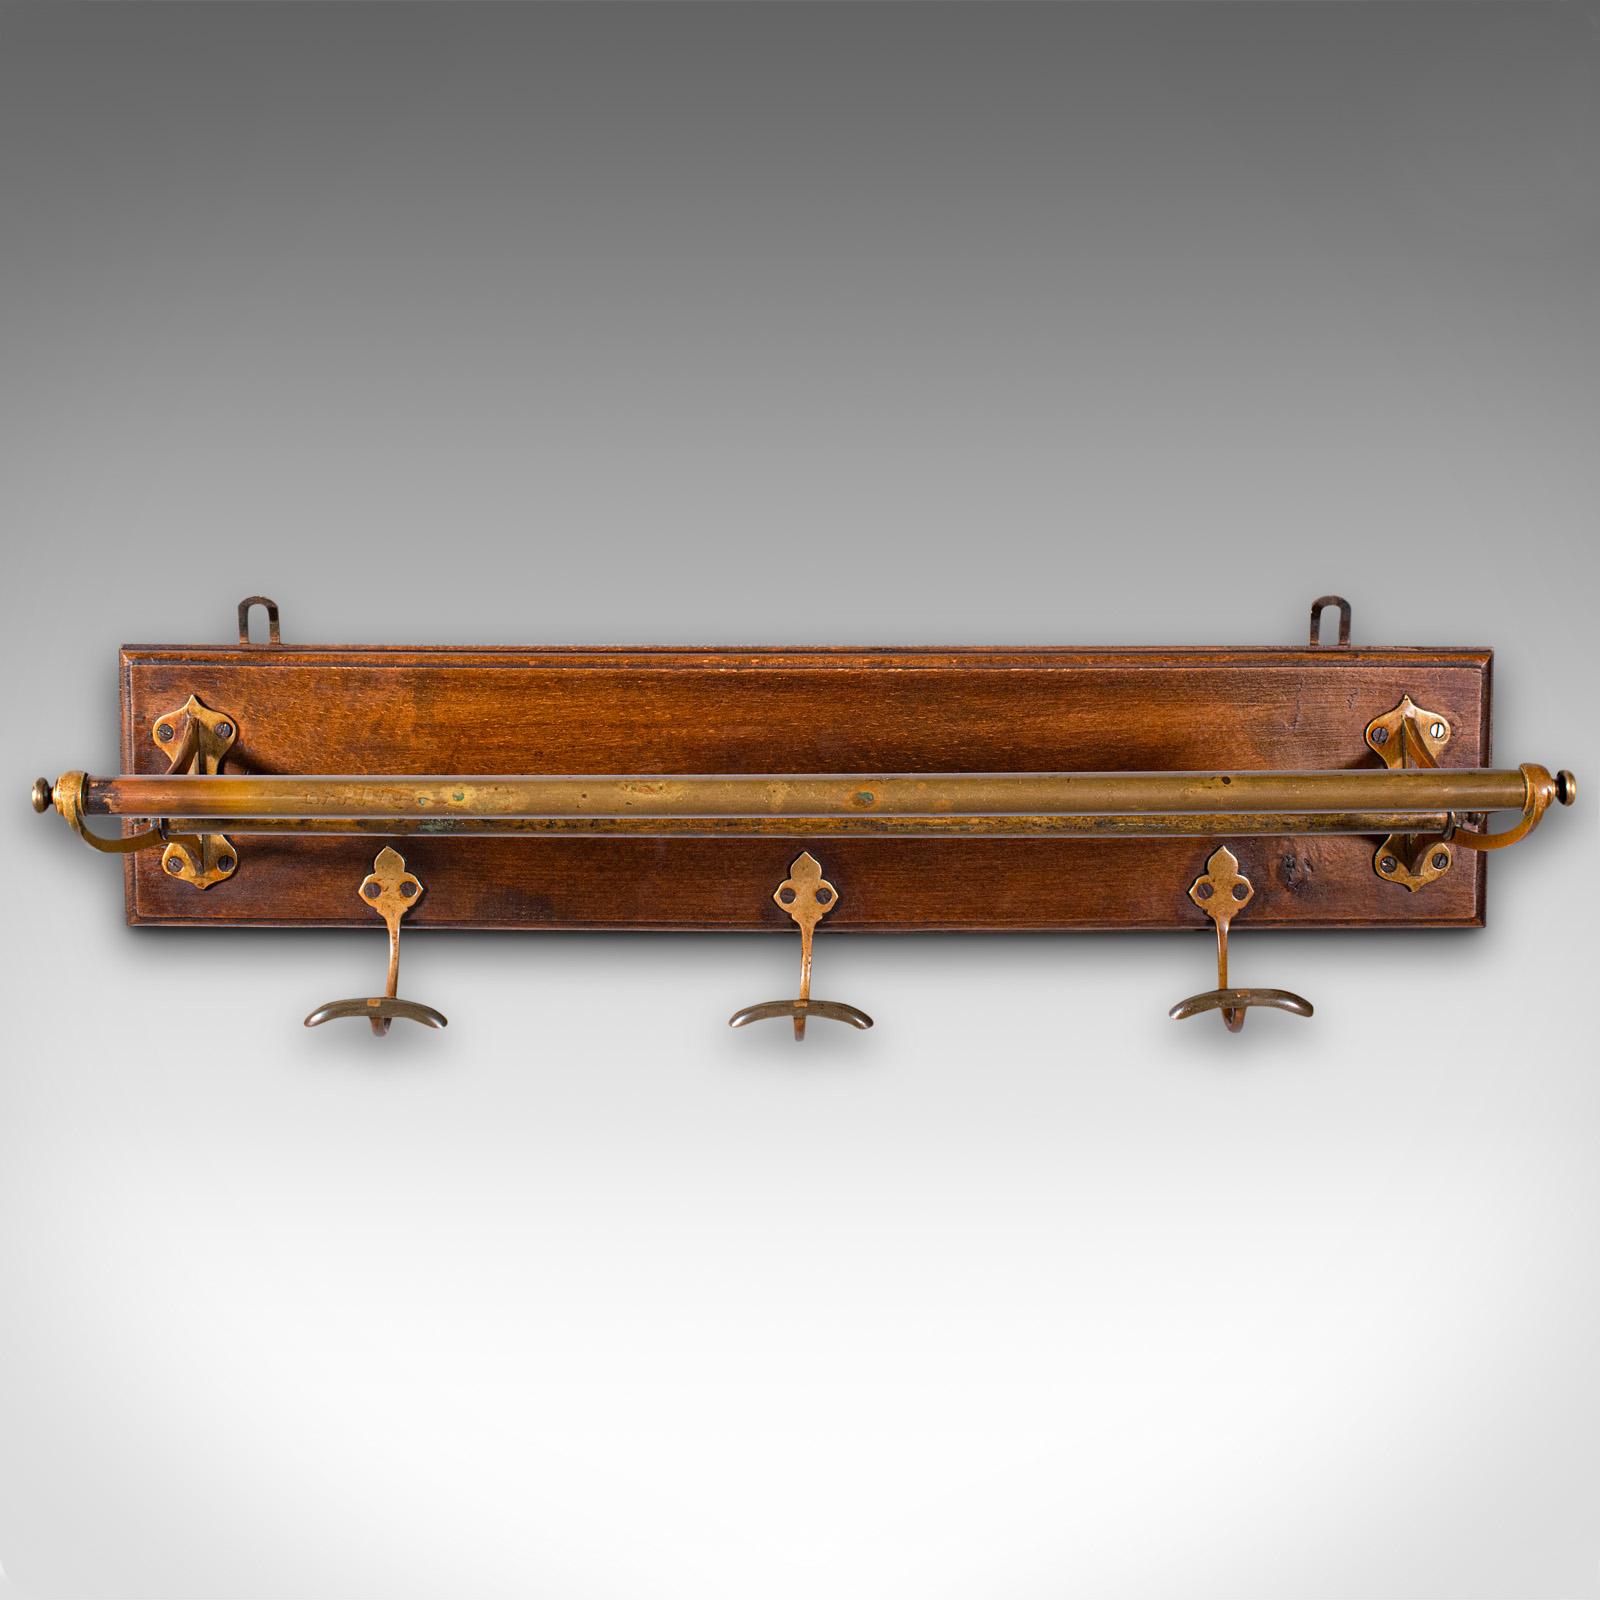 This is an antique country house wall rack. An English, brass and oak reception hall valet, dating to the Victorian period, circa 1880.

A welcome sight as you enter the hallway, with superb Victorian appeal
Displays a desirable aged patina and in